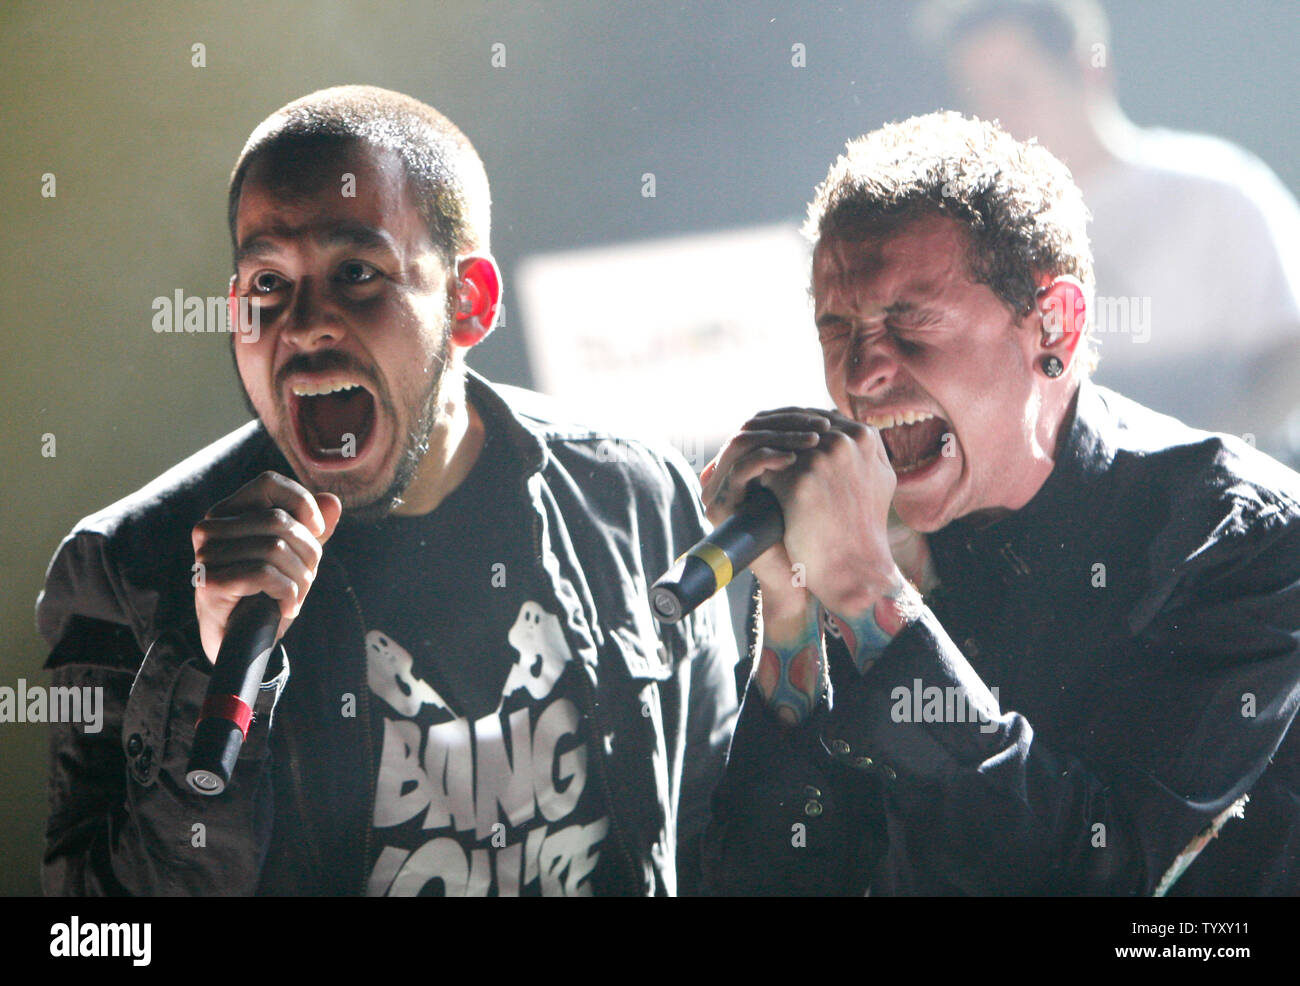 Mike Shinoda (L) and Chester Bennington of the band Linkin Park perform in concert at Bercy in Paris on May 30, 2007.   (UPI Photo/David Silpa) Stock Photo